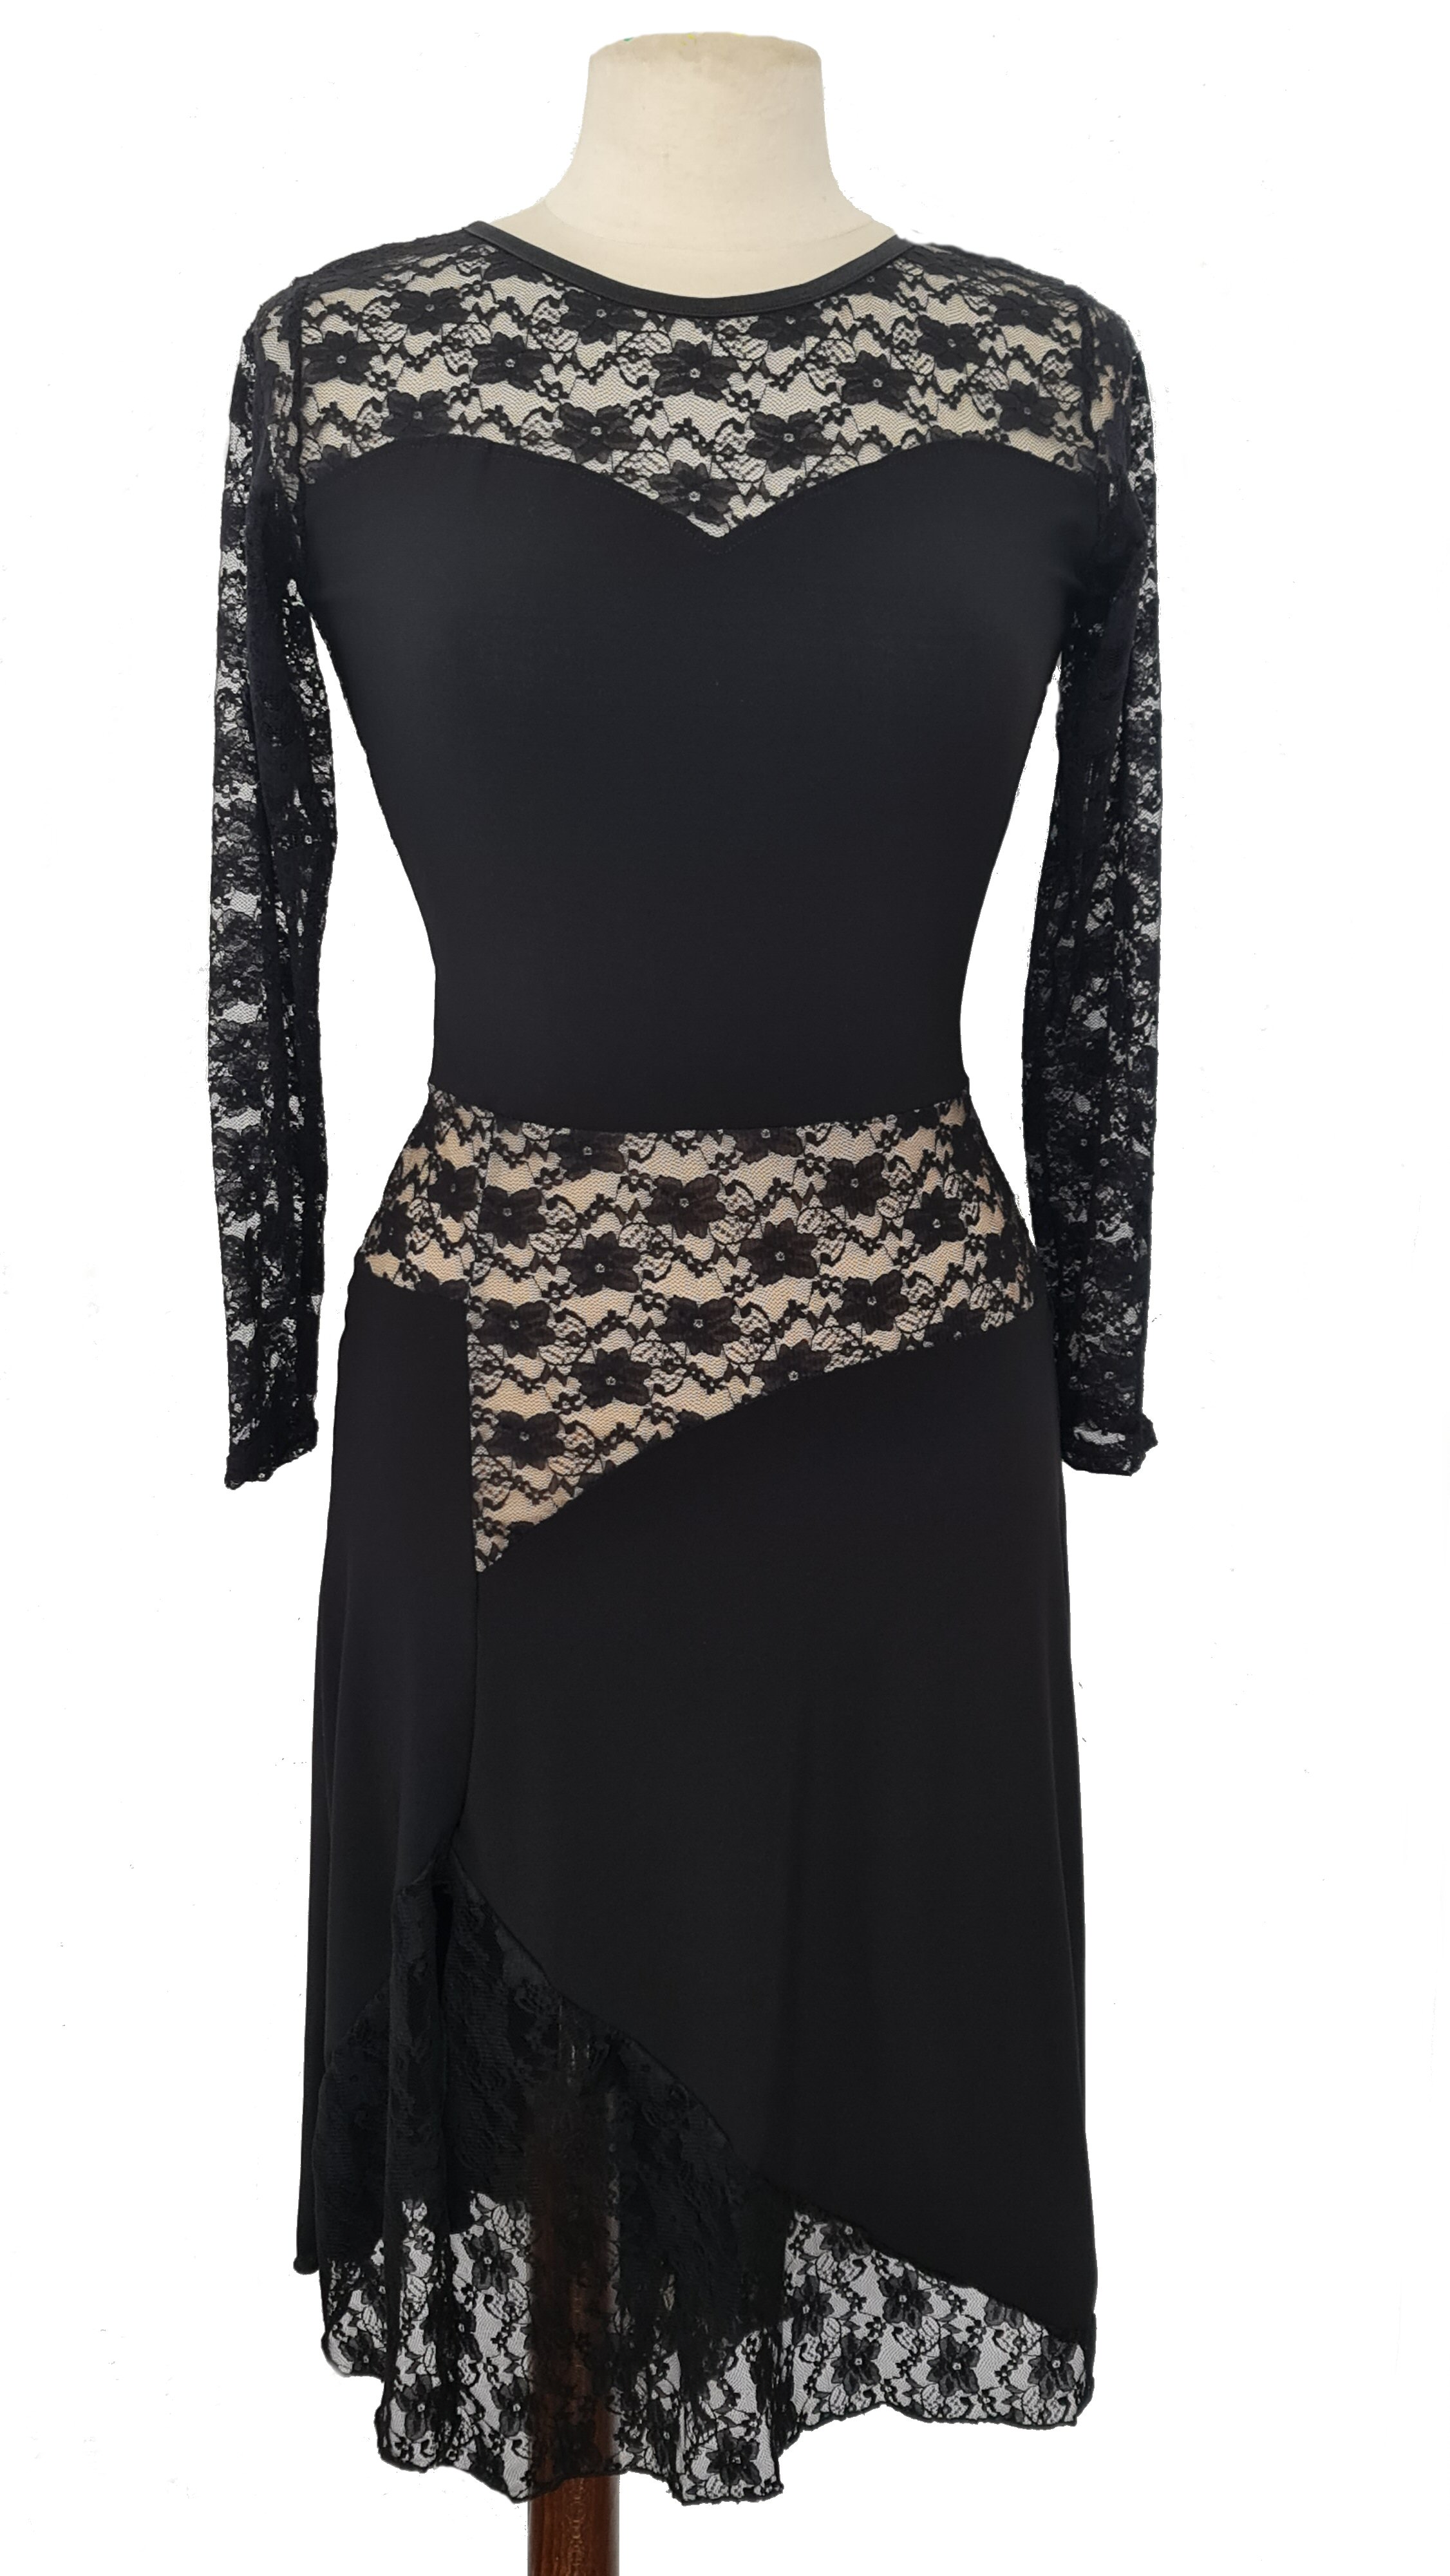 Argentine Tango dress with lace back and sleeves